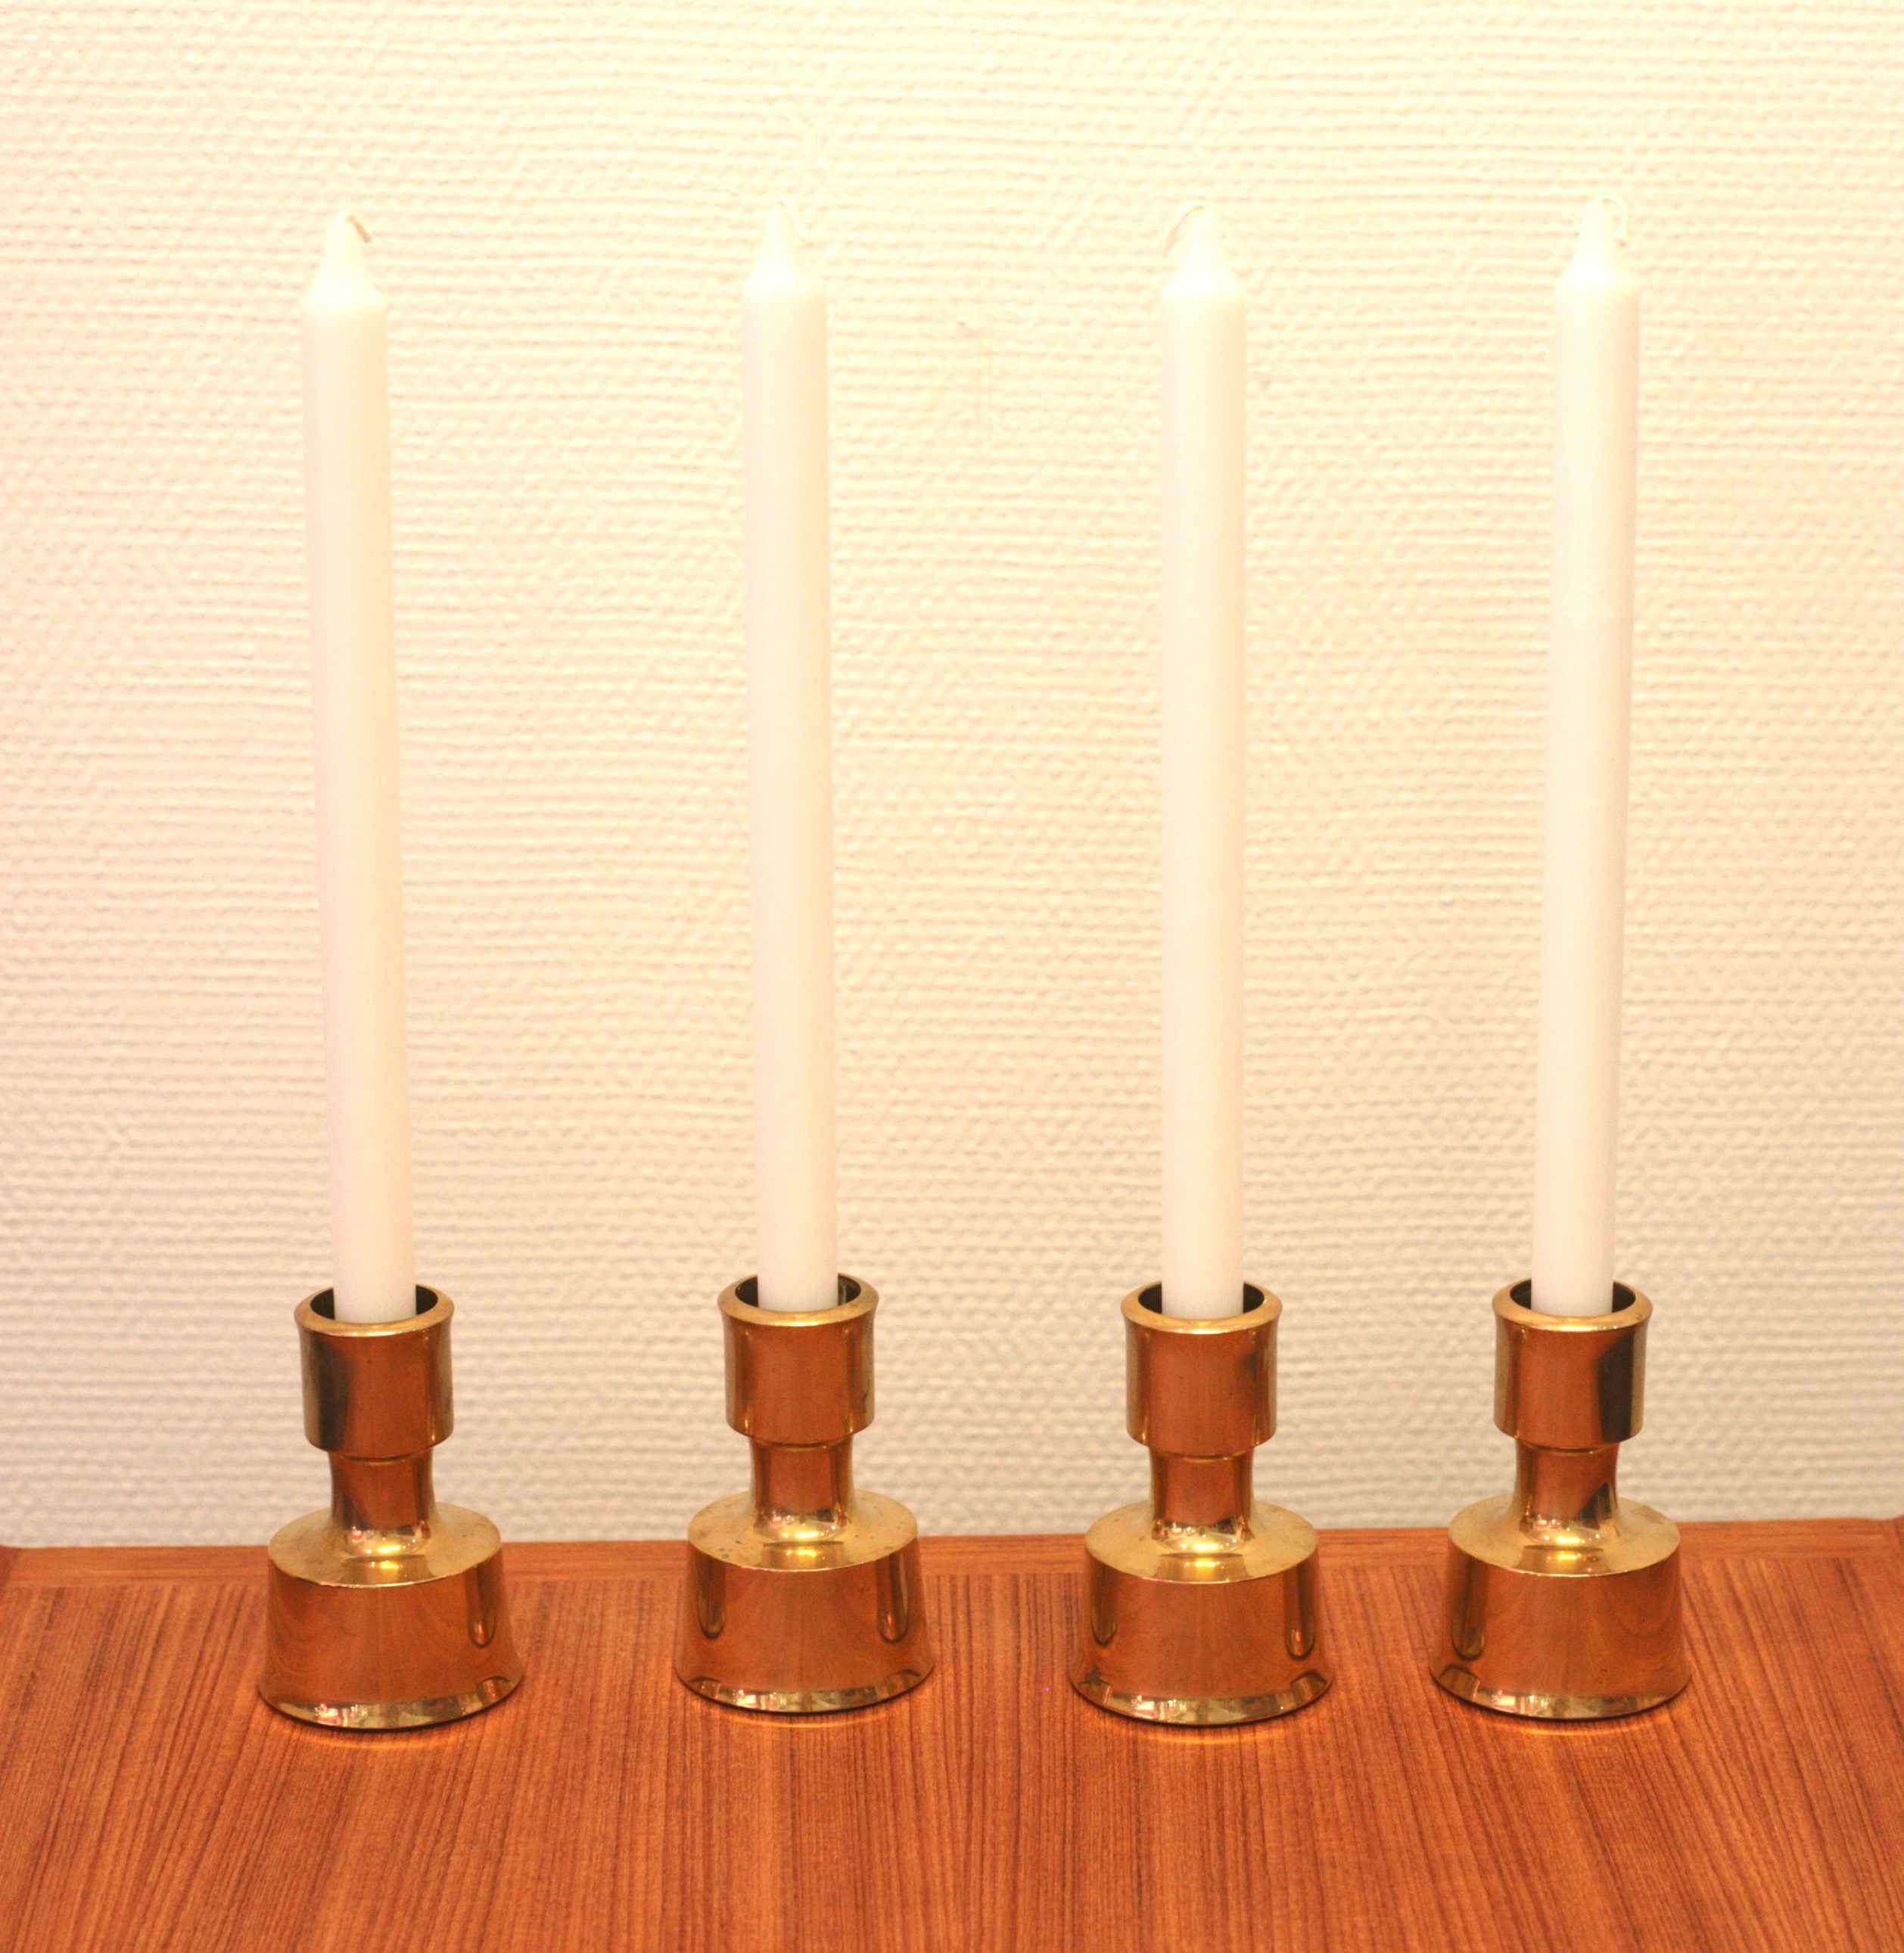 Jens H Quistgaard - Set of 4 candle holders